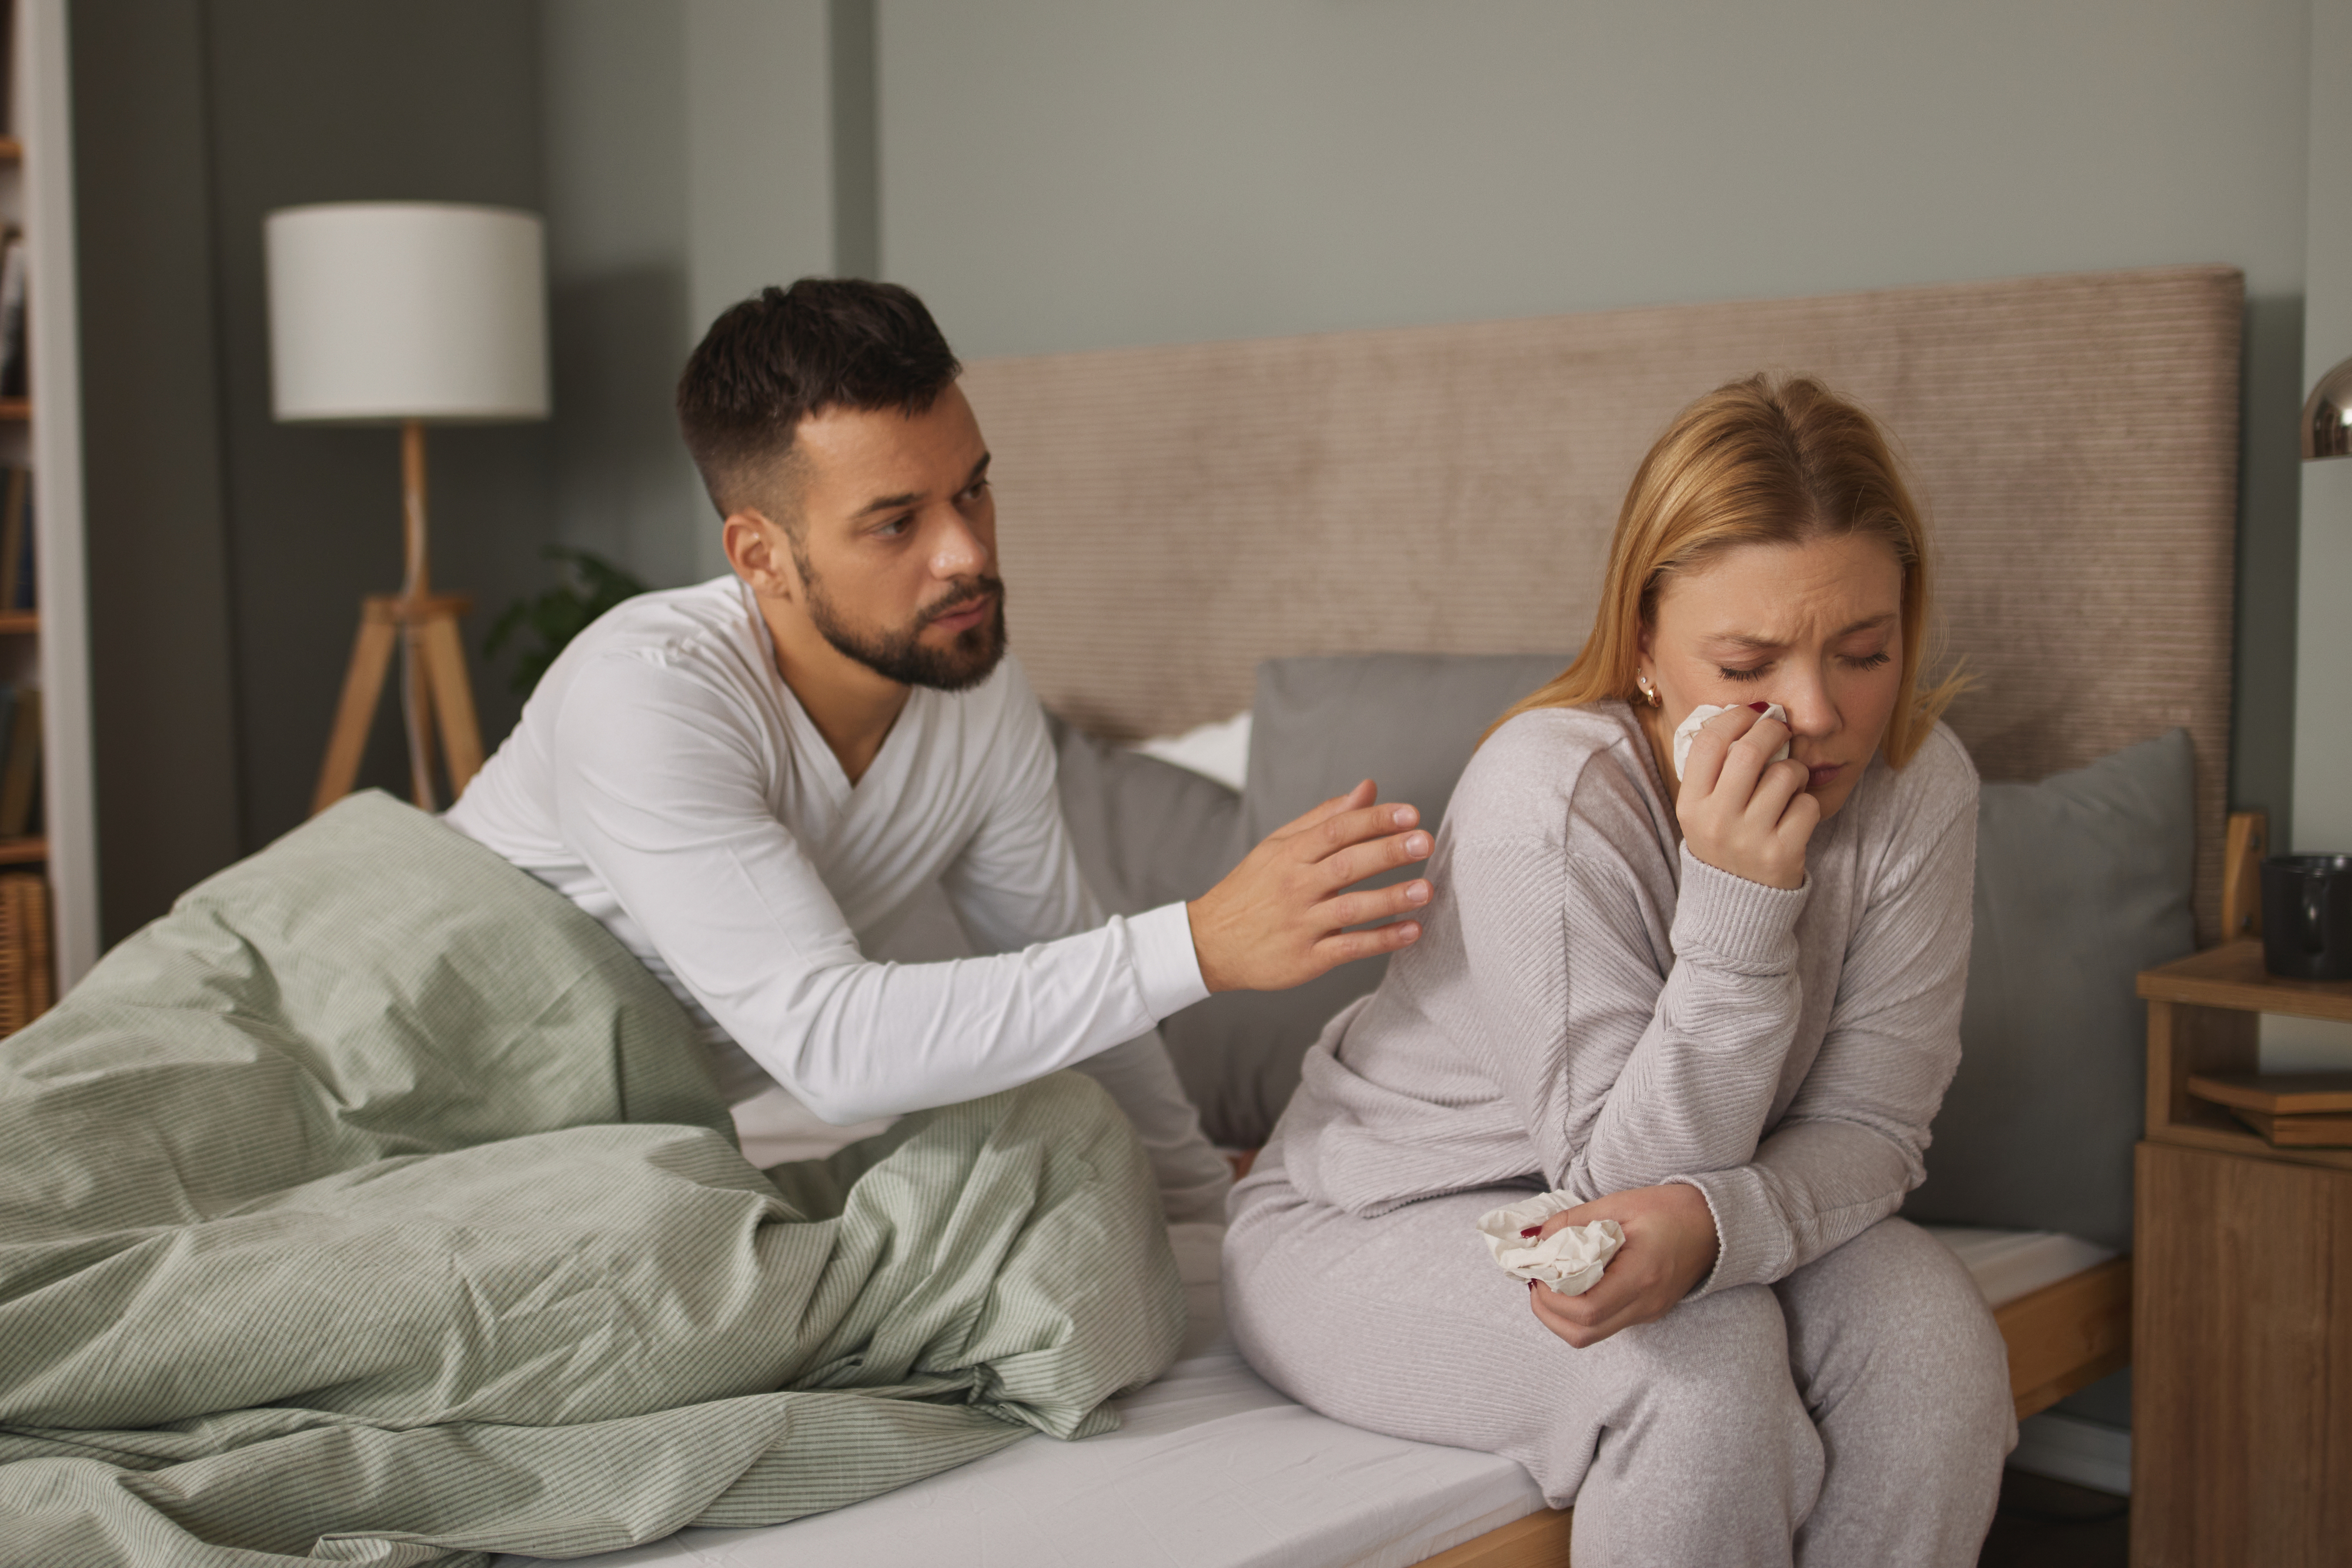 Man comforting upset woman sitting on bed, both in casual attire